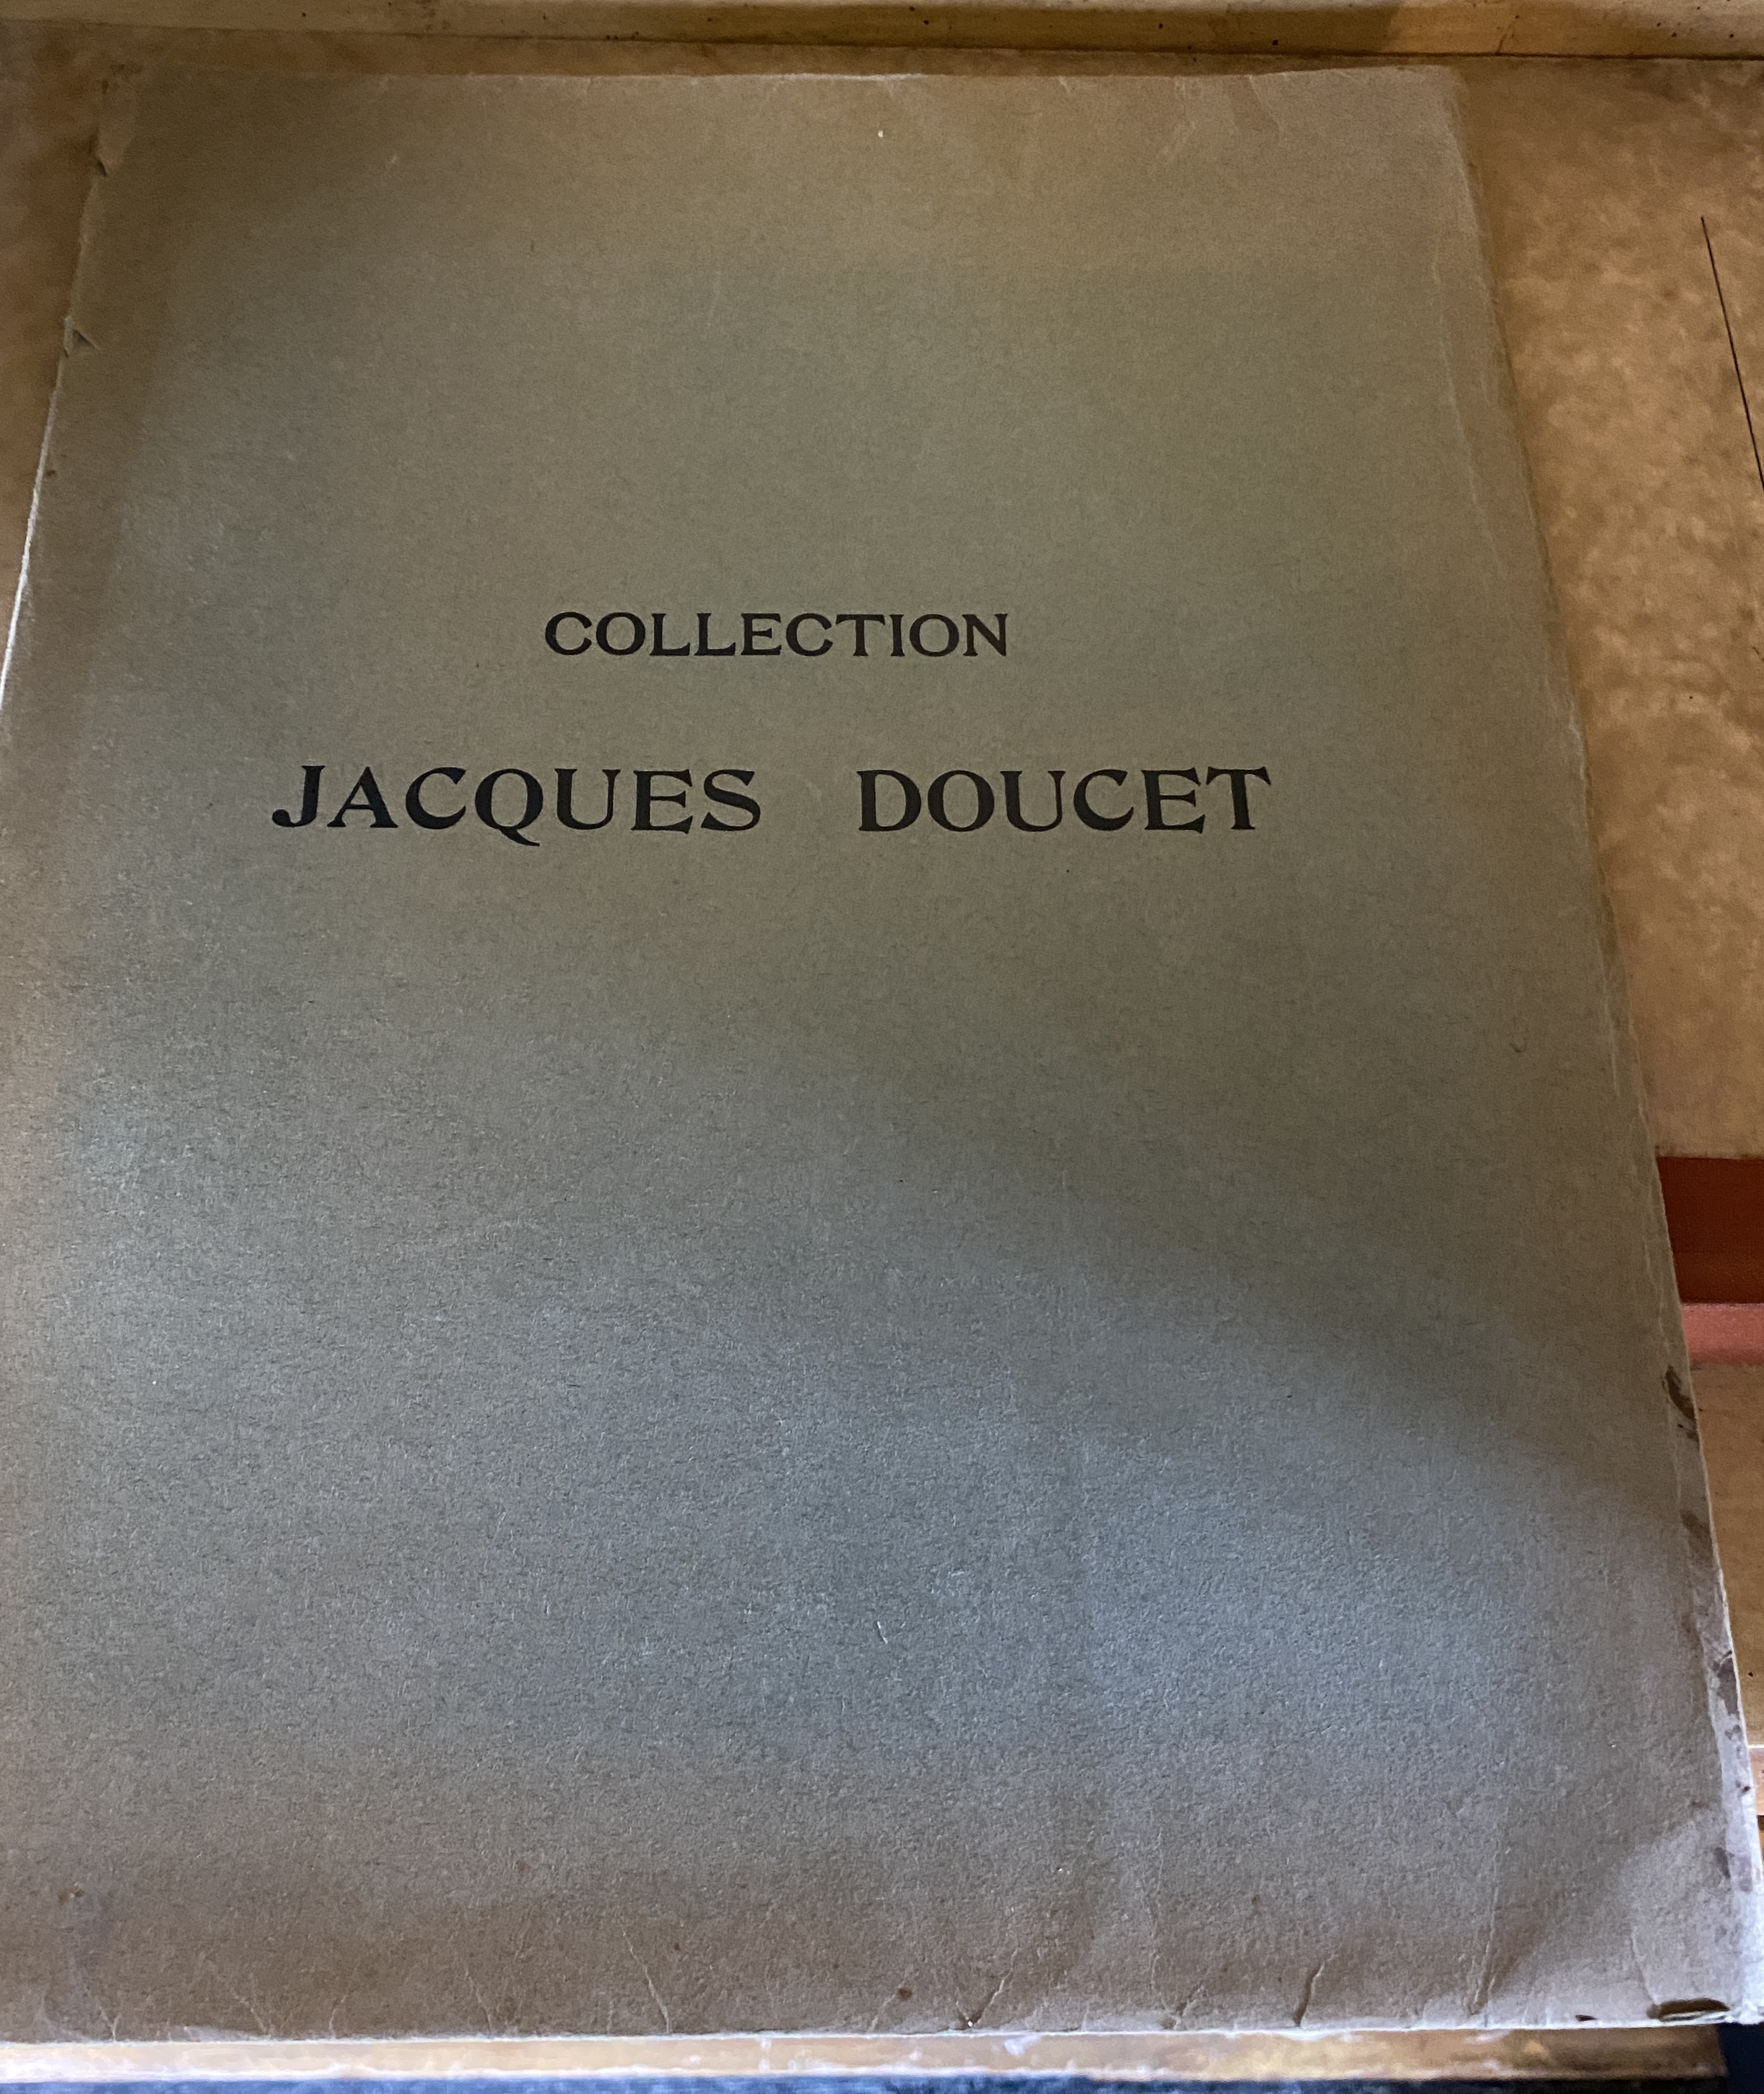 Auction Catalogues of Famous Art Collections - Image 5 of 9